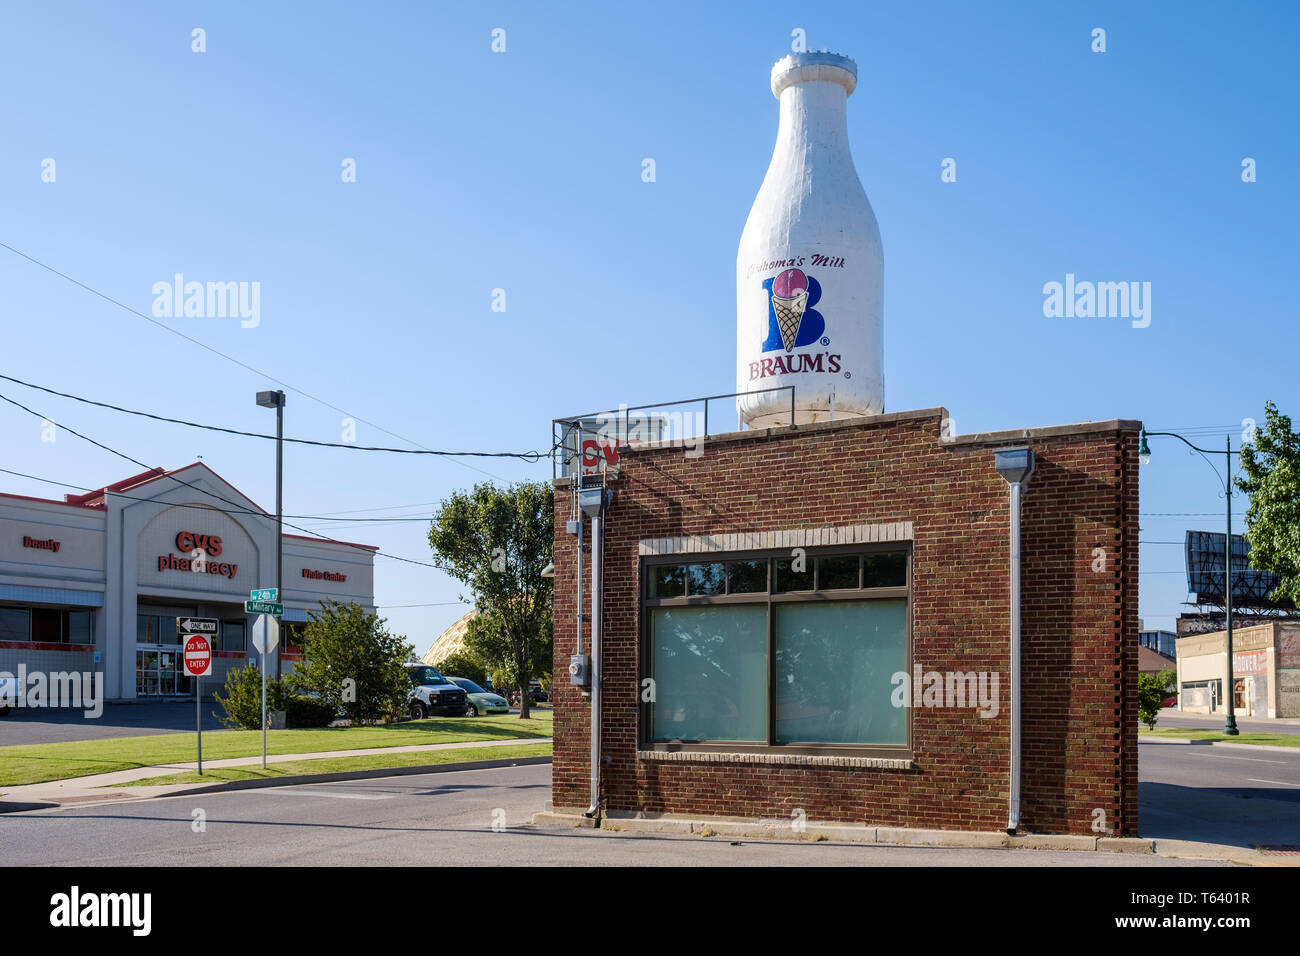 Historic U.S. Route 66  Milk Bottle Grocery is a roadside attraction located at 2426 North Classen Blvd in Oklahoma City, USA Stock Photo